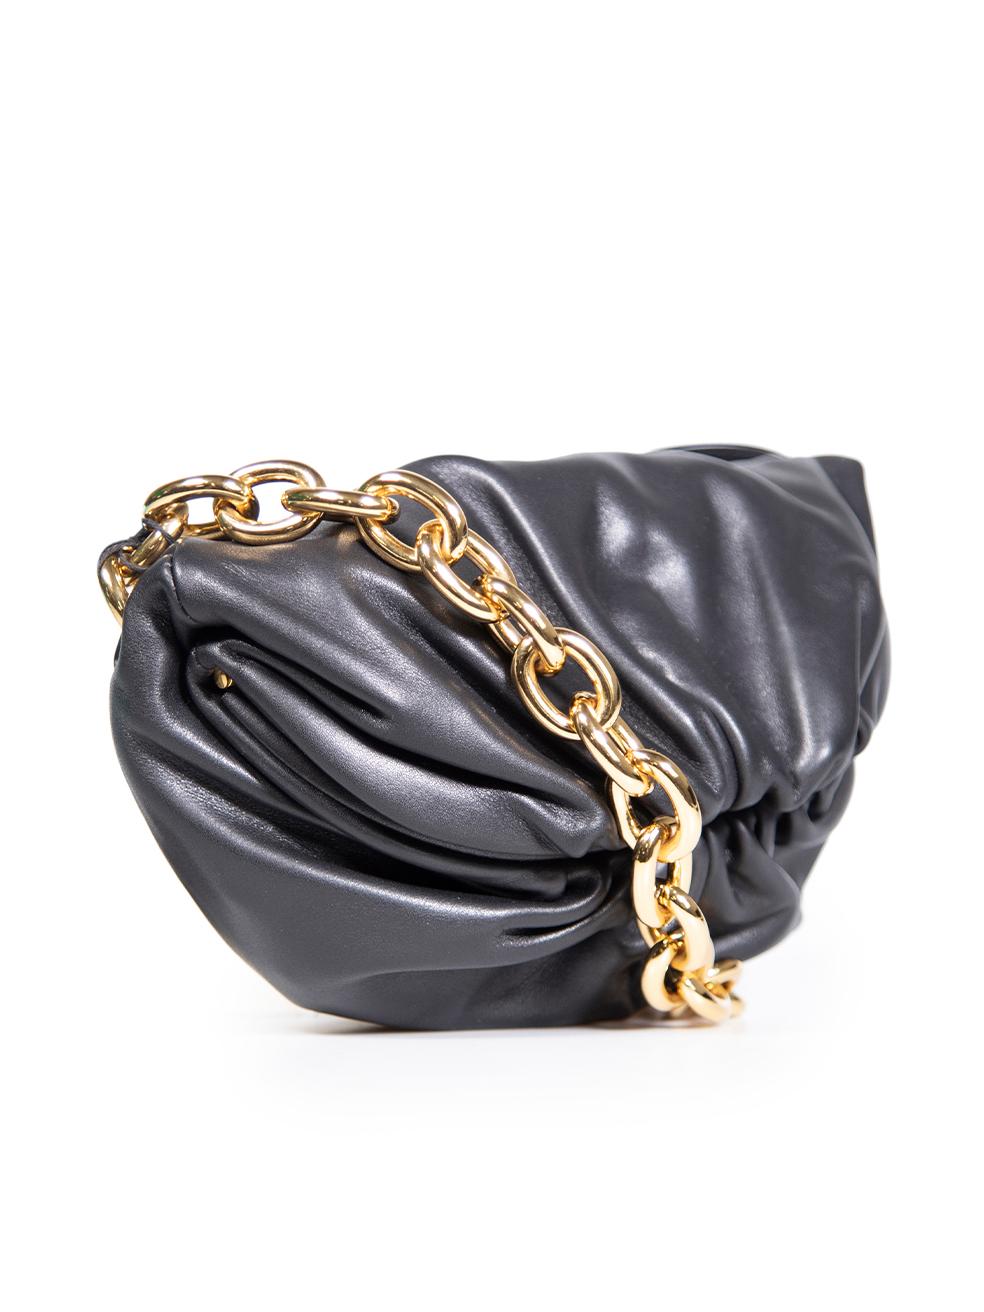 CONDITION is Never worn, with tags. No visible wear to bag is evident on this new Bottega Veneta designer resale item. Comes with original dust bag.
 
 Details
 Chain Pouch
 Black
 Leather
 Mini crossbody bag
 Gold hardware
 Chain strap
 Magnetic